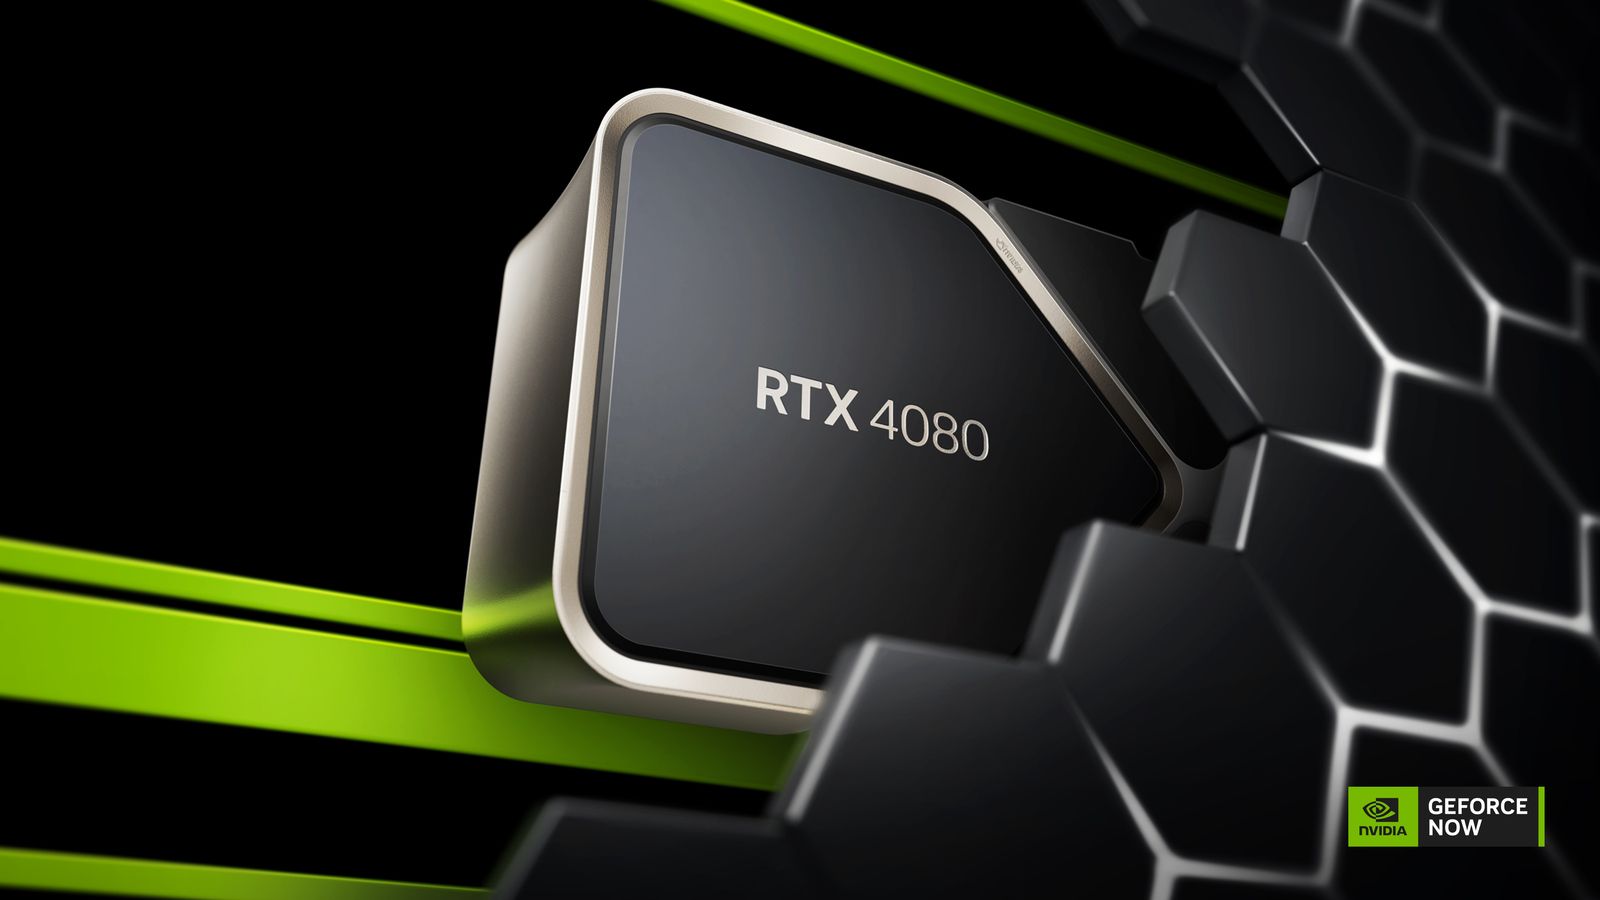 S18 Ep1240: Nvidia GeForce NOW RTX 4080 Hands-On Impressions and The Spawnies Interview